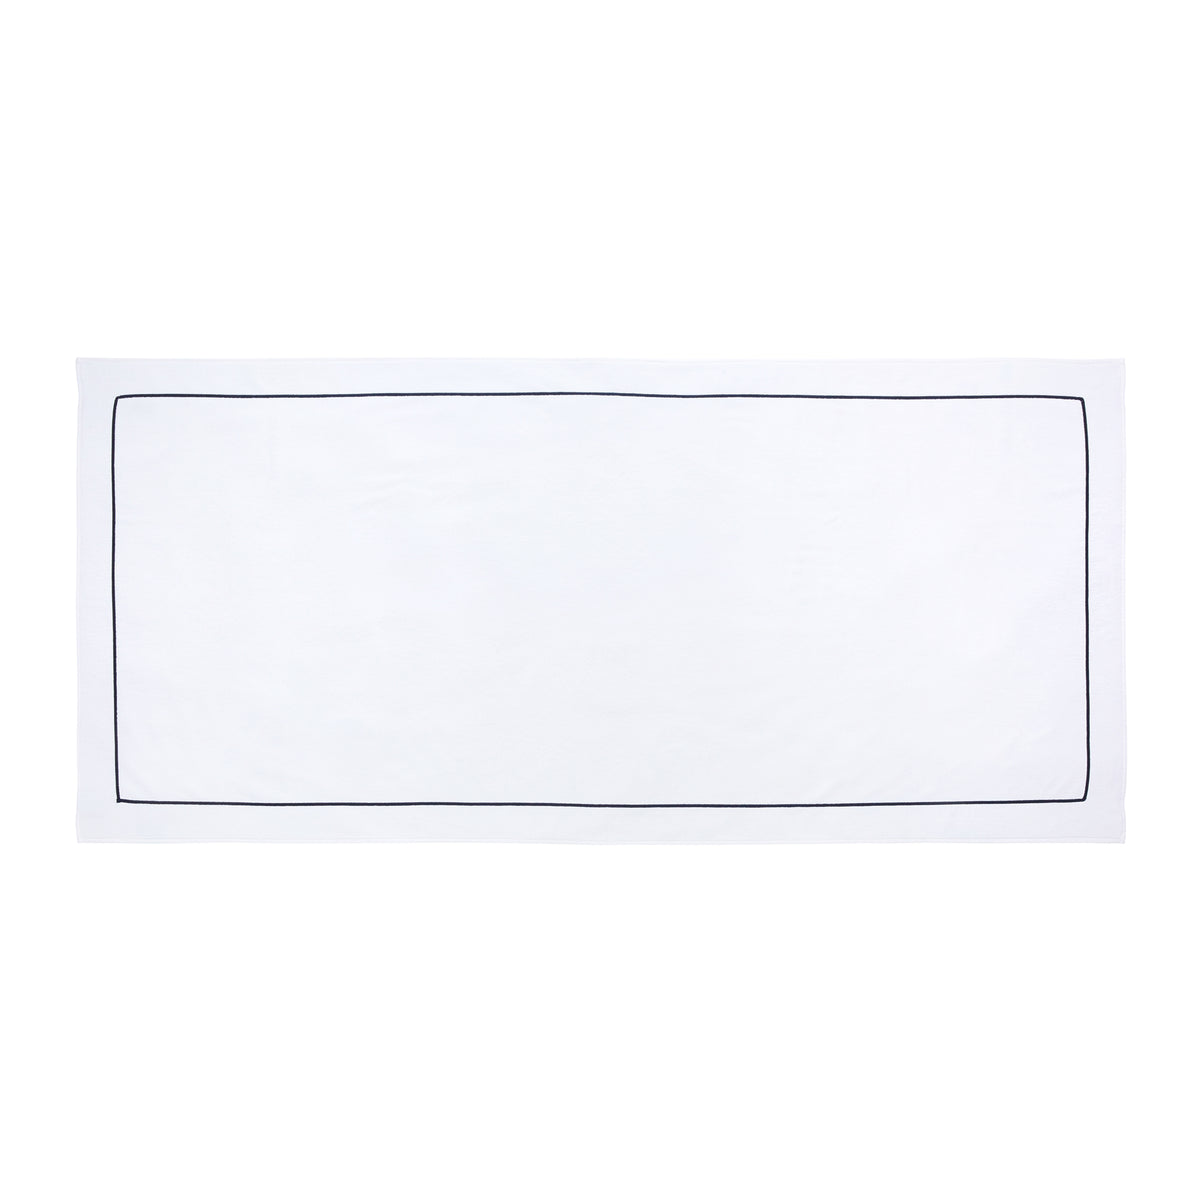 Clear Image of Yves Delorme Croisiere Beach Towels Blanc